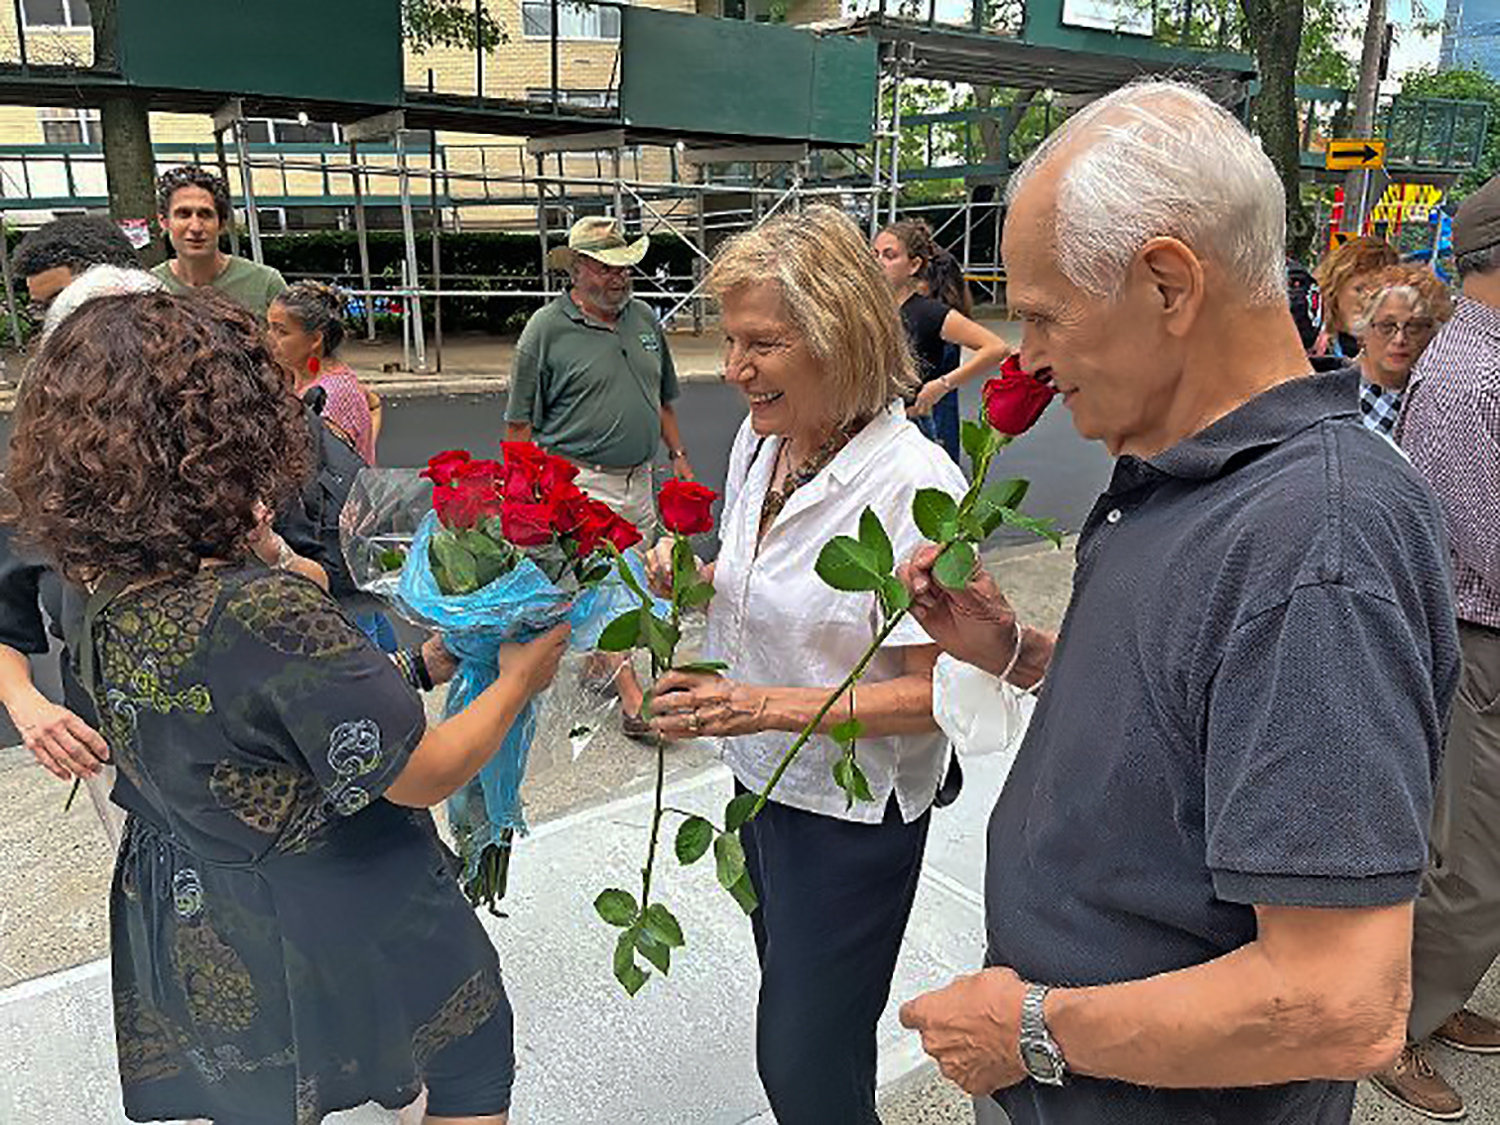 Jude Tuber, a first assistant director on the 1987 John Malkovich film ‘Making Mr. Right,’ smells a rose intended to honor his late friend and colleague, Ruth Mullen, who was killed last year while crossing at the intersection of Kappock Street and Johnson Avenue just a few yards away,